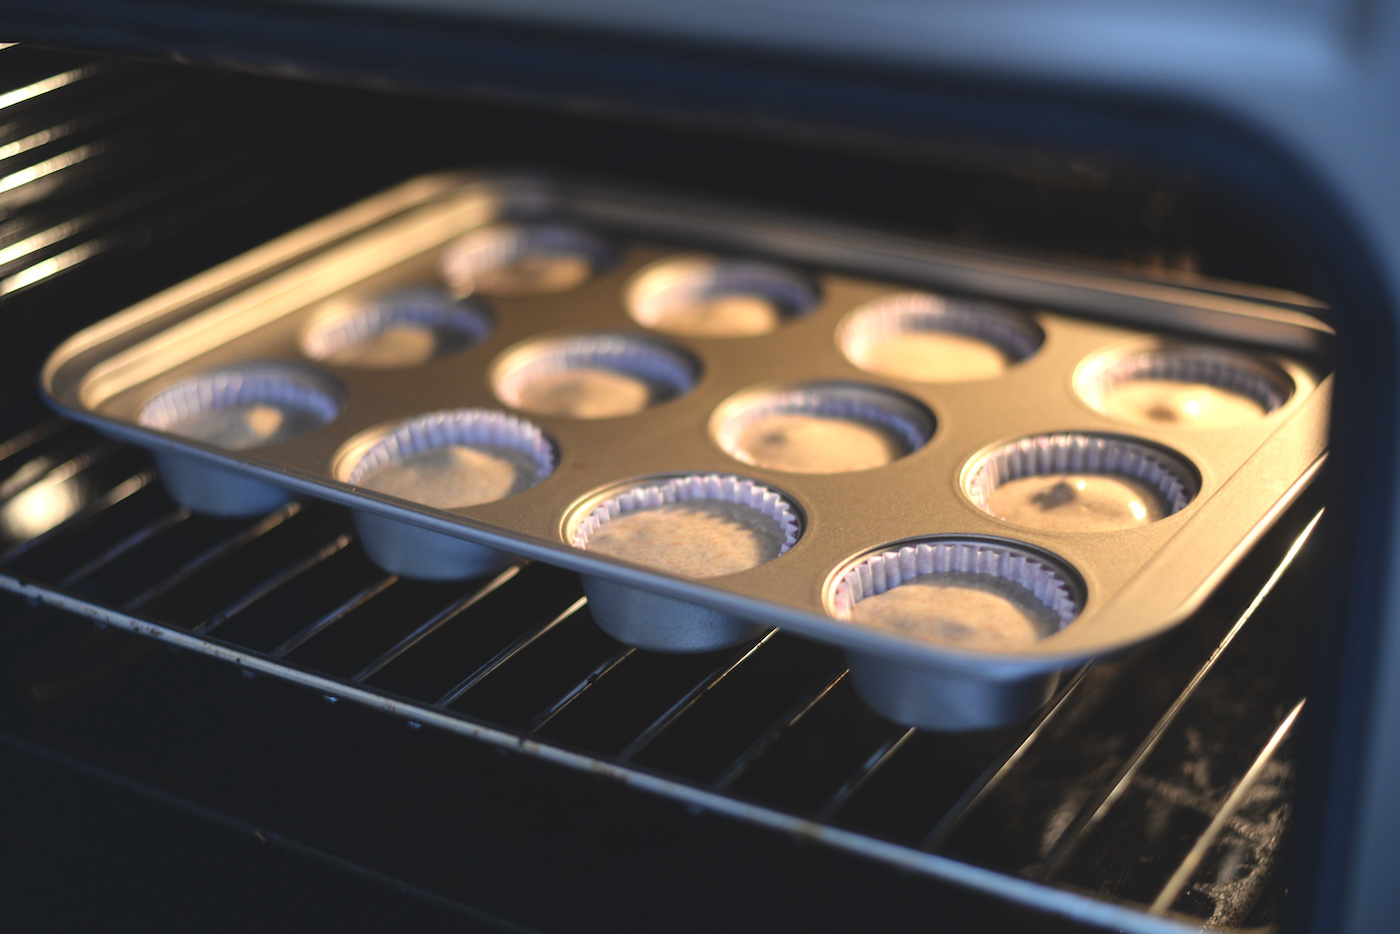 Cupcakes-baking-in-the-oven